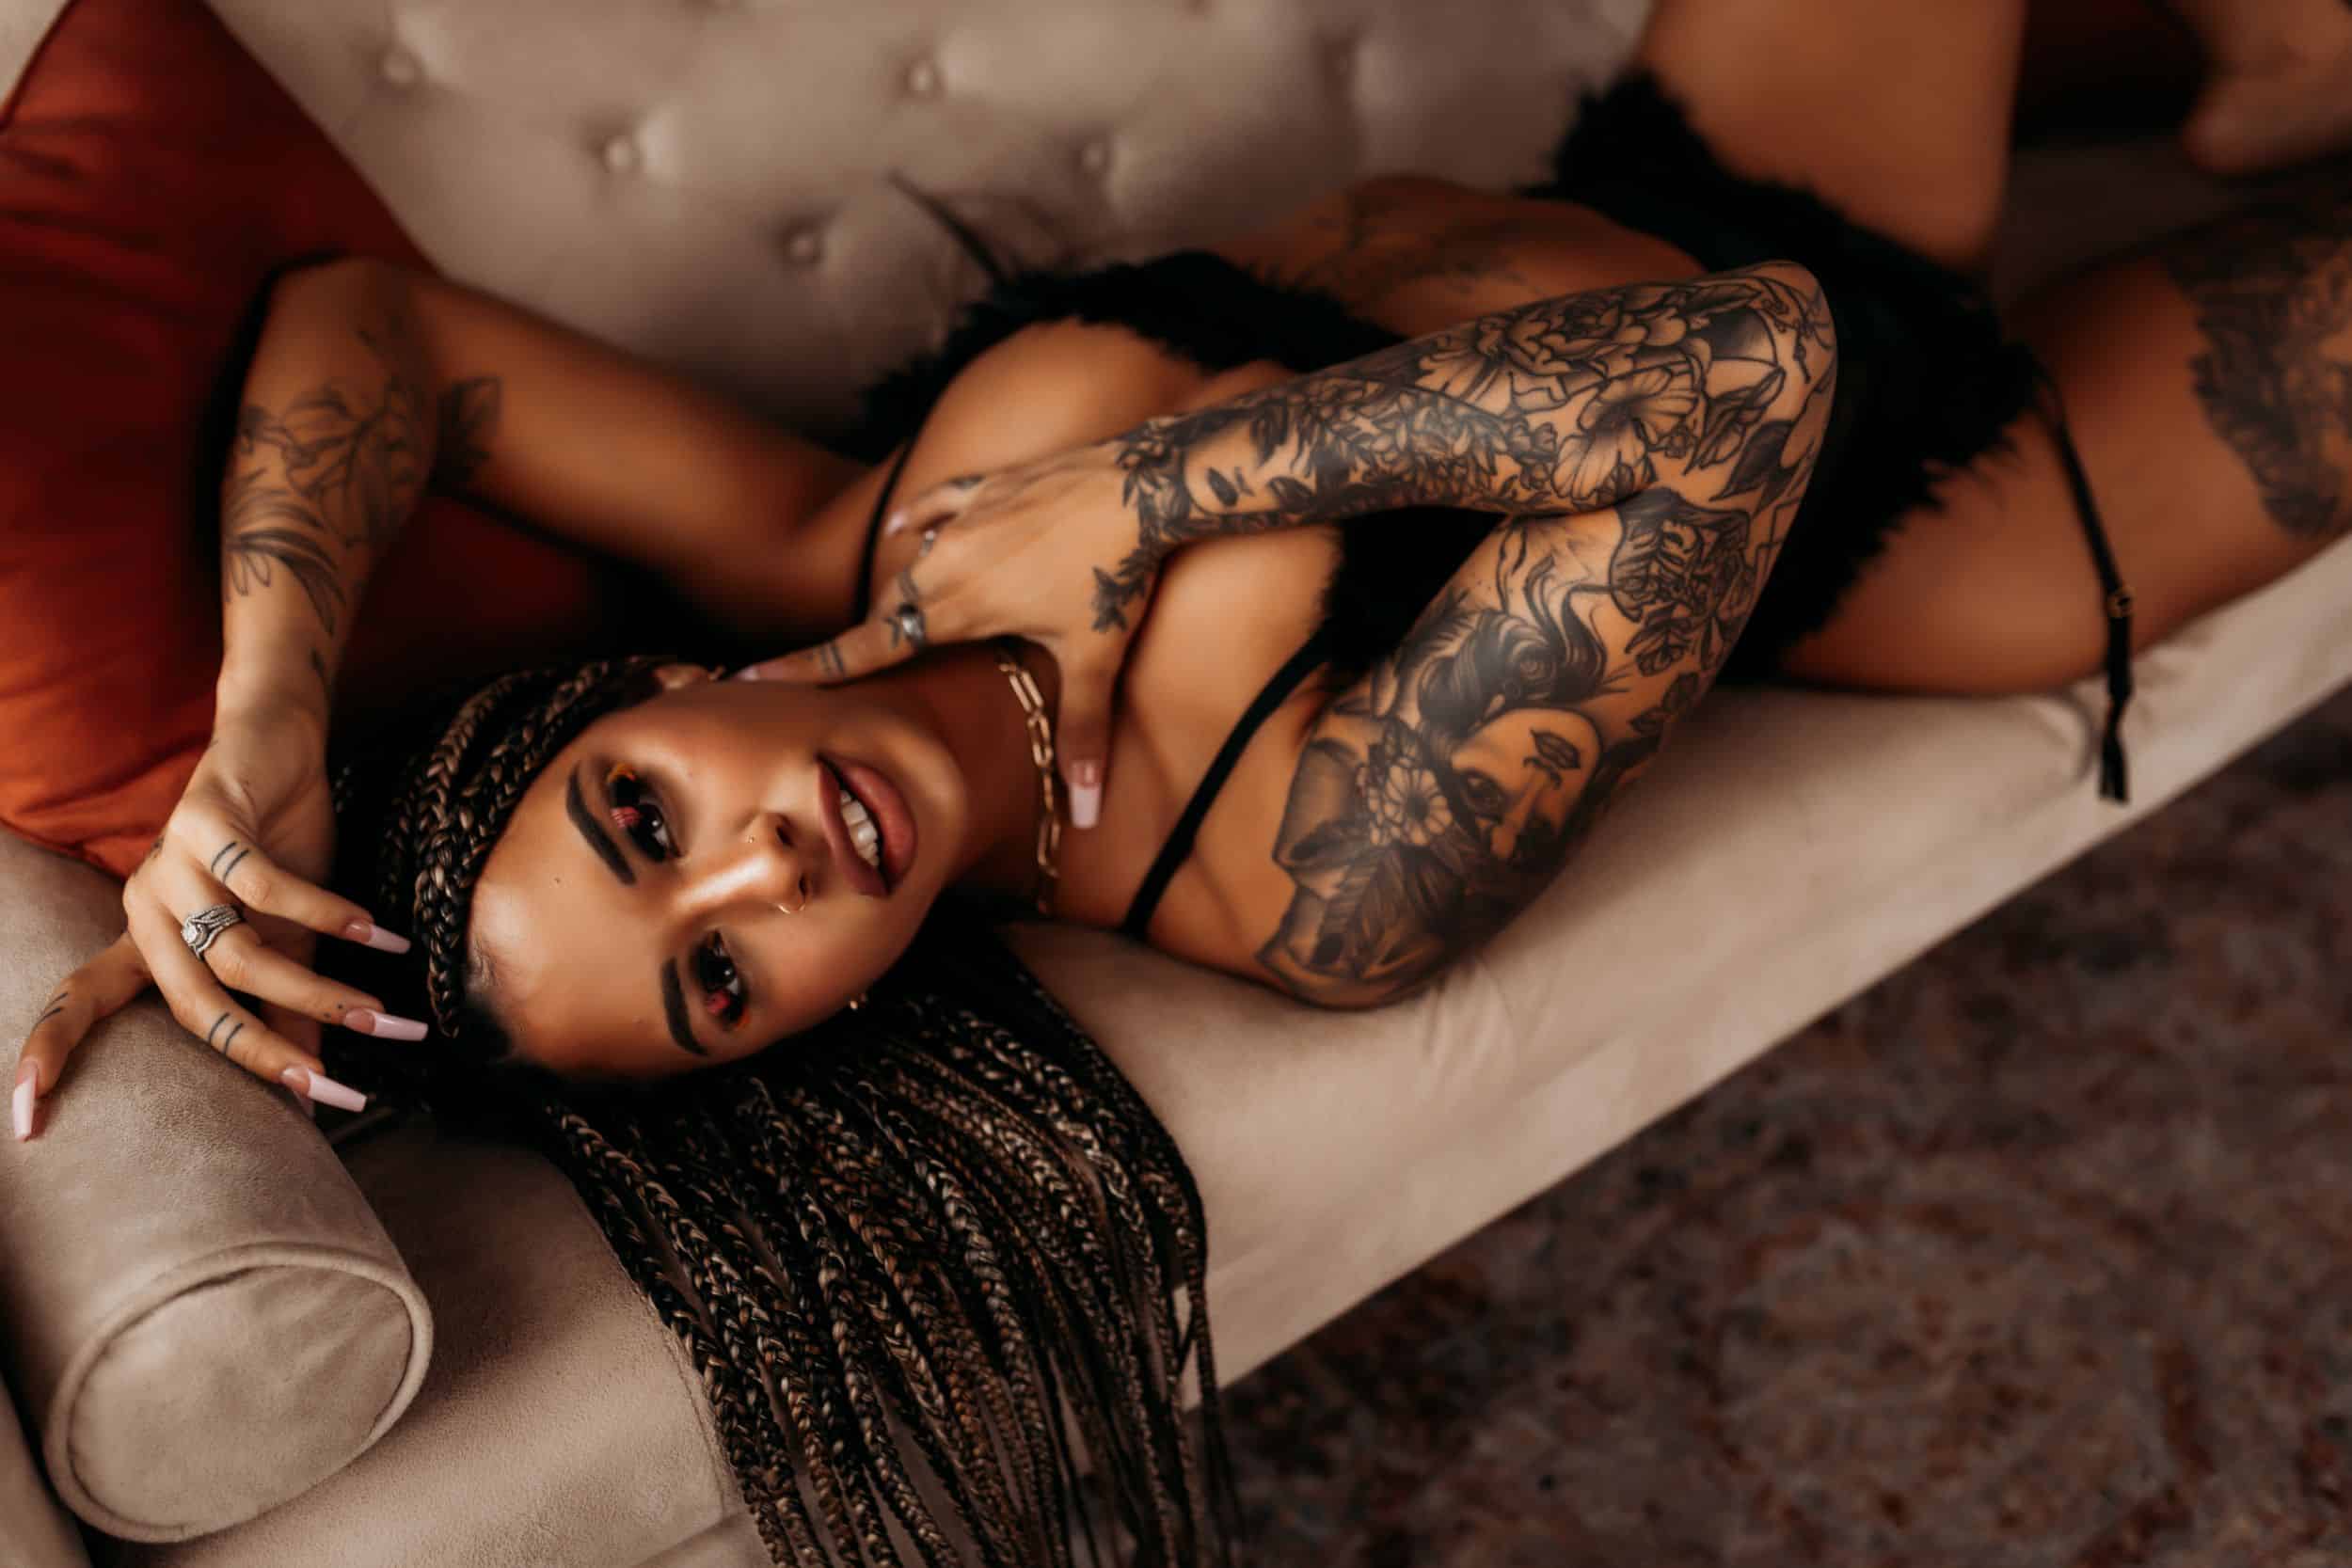 A girl with braids and tattoos lying on a sofa for an all-things boudoir photoshoot.